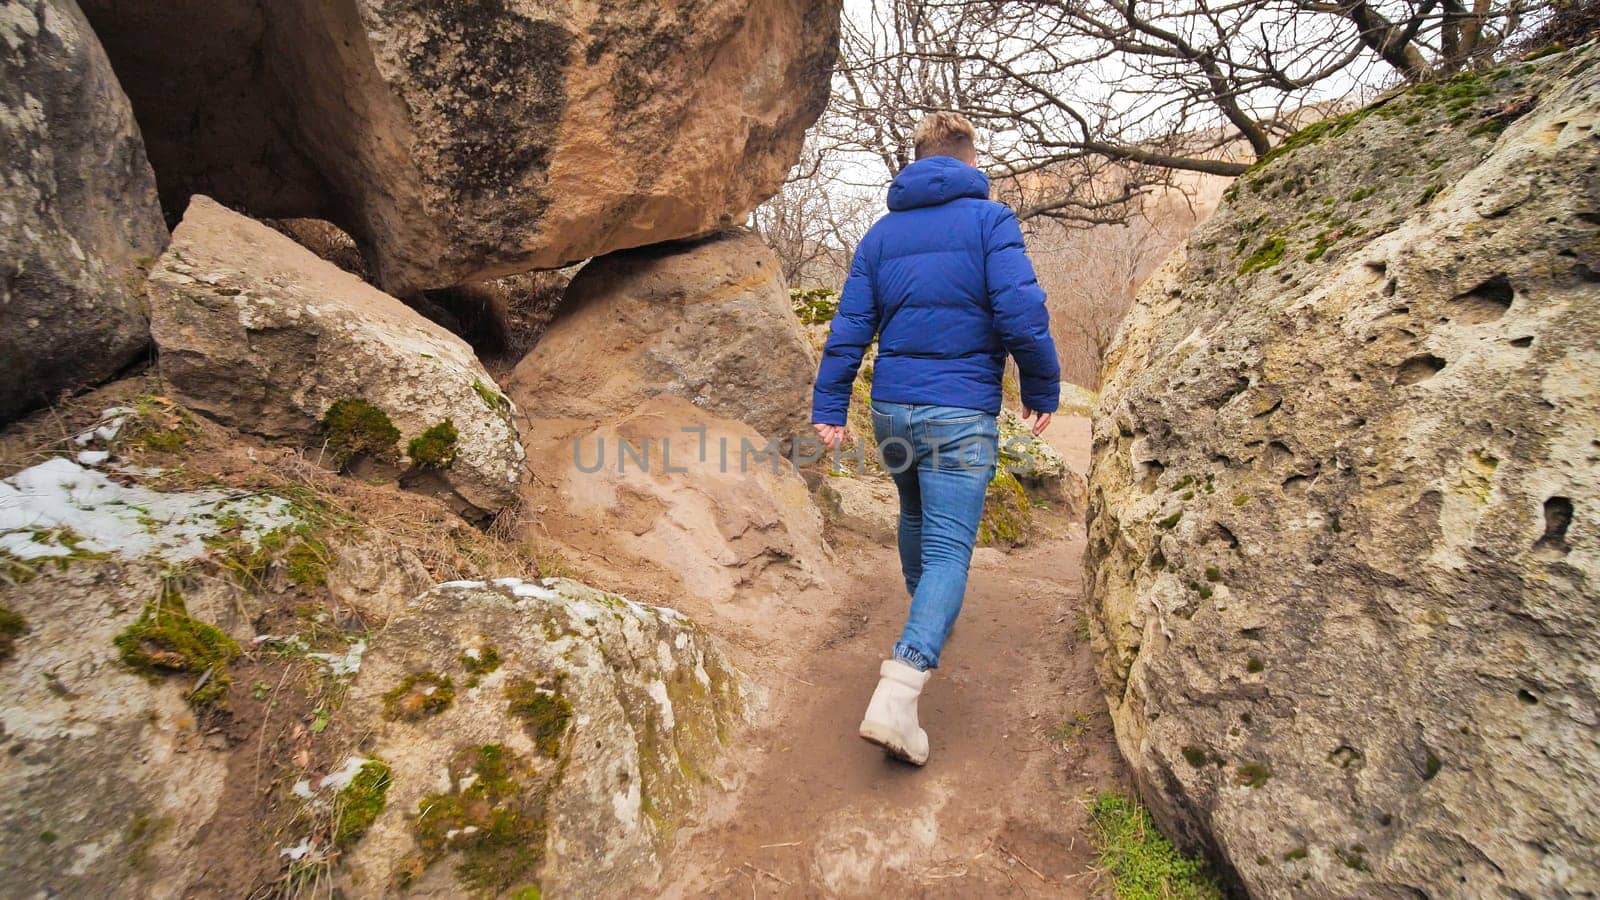 A tourist strolling among the rocks in the Ihlara Valley in Cappadocia, Turkey